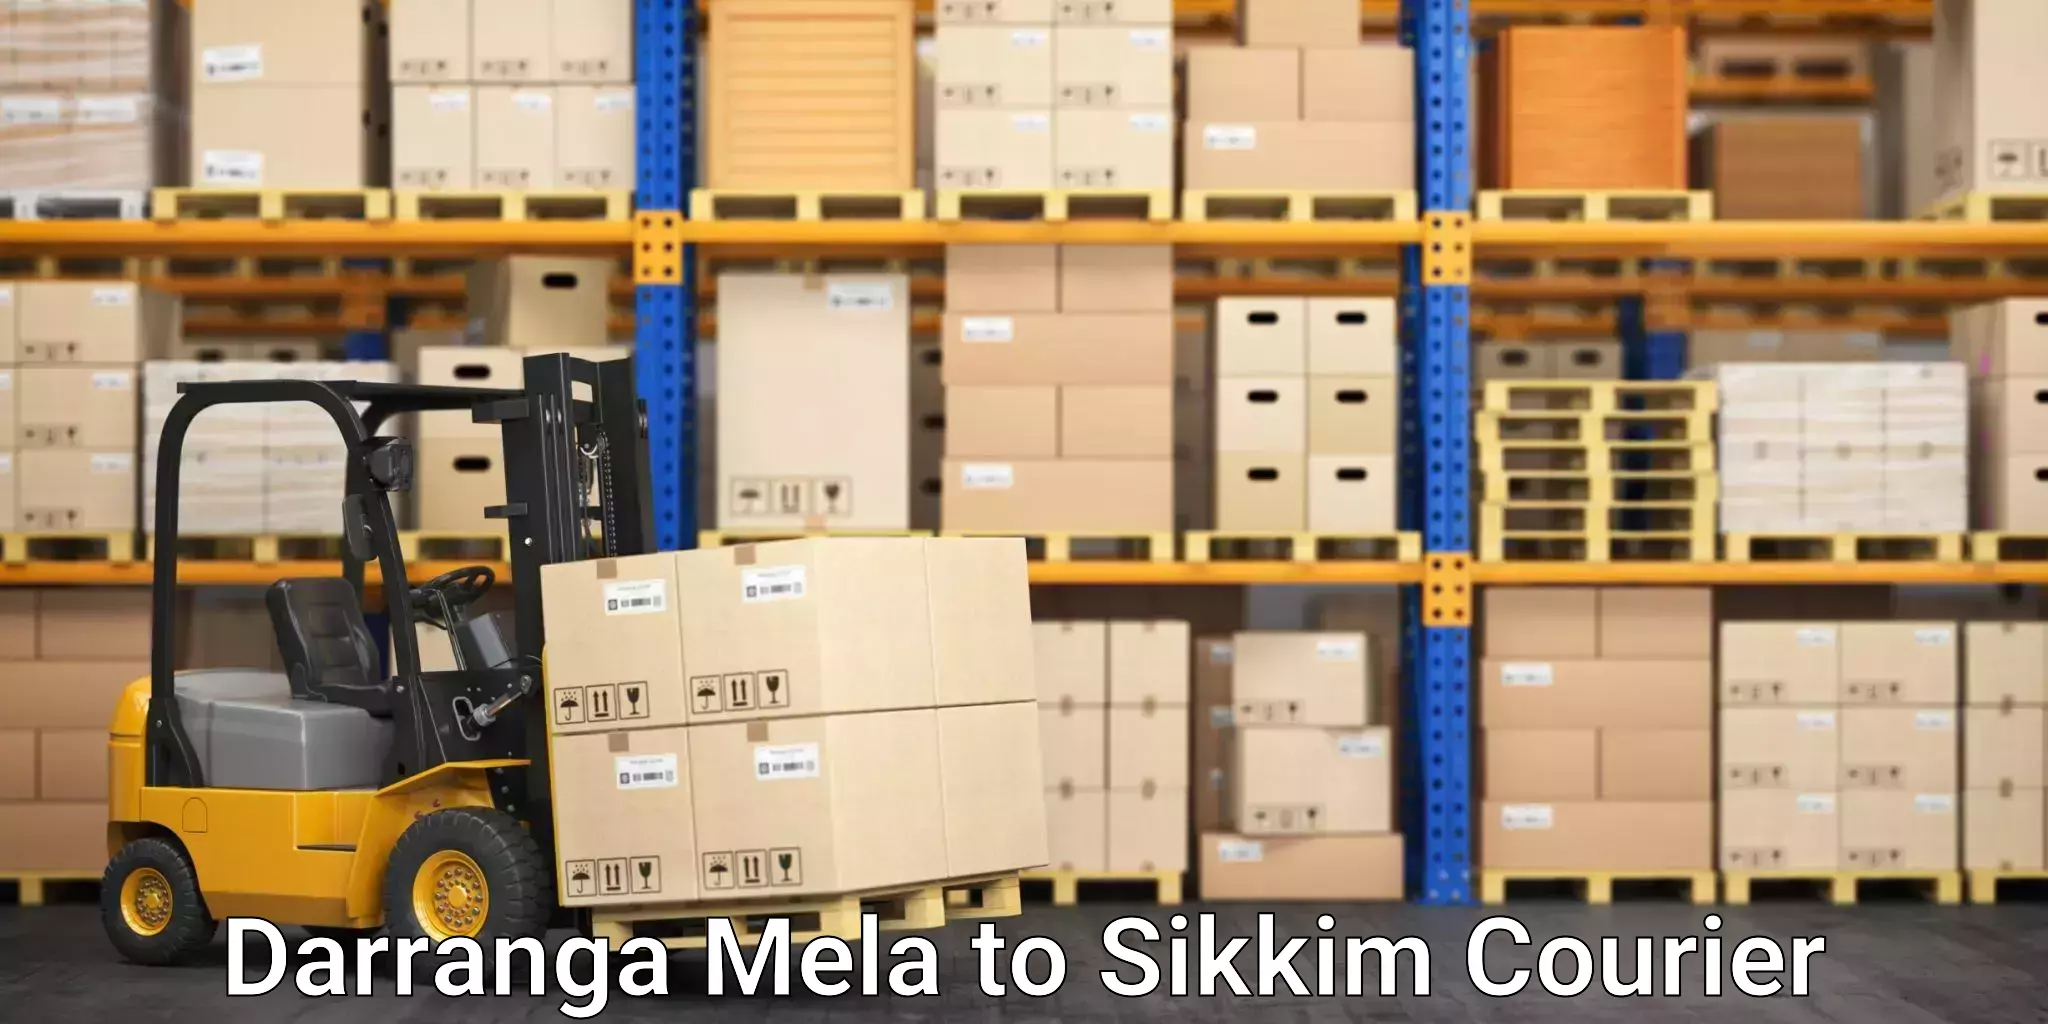 Tailored delivery services Darranga Mela to East Sikkim